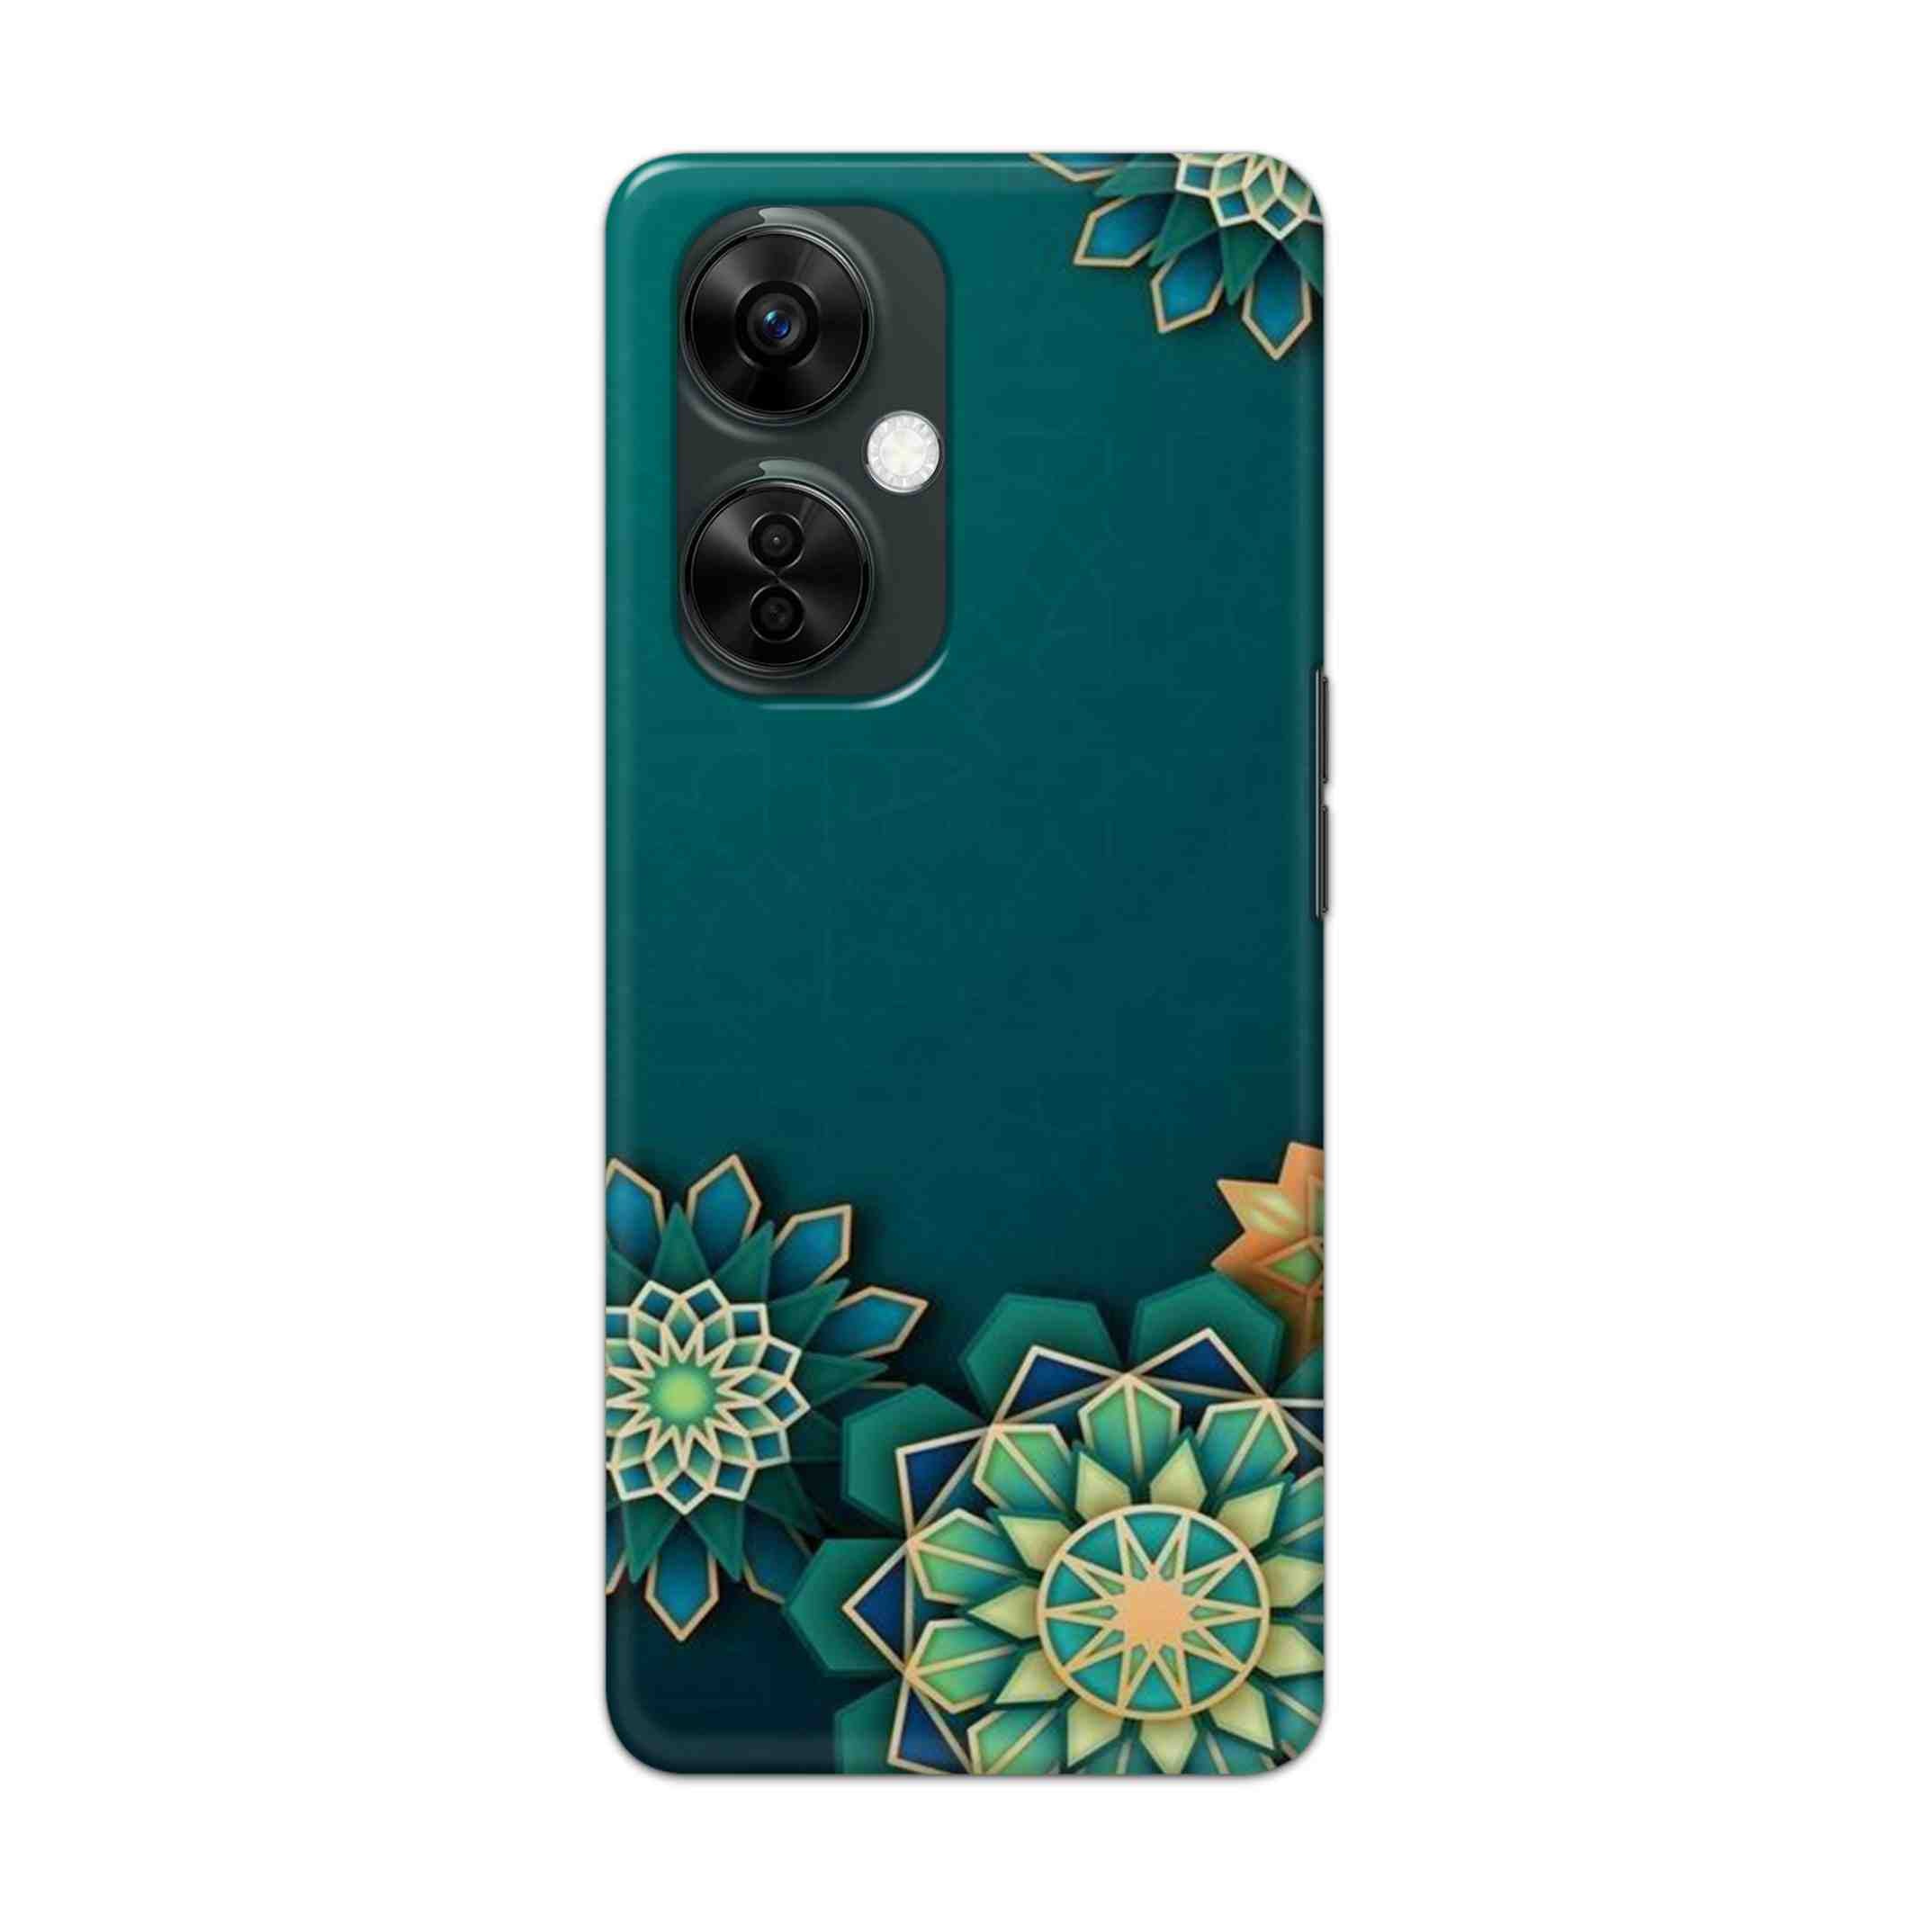 Buy Green Flower Hard Back Mobile Phone Case Cover For Oneplus Nord CE 3 Lite Online